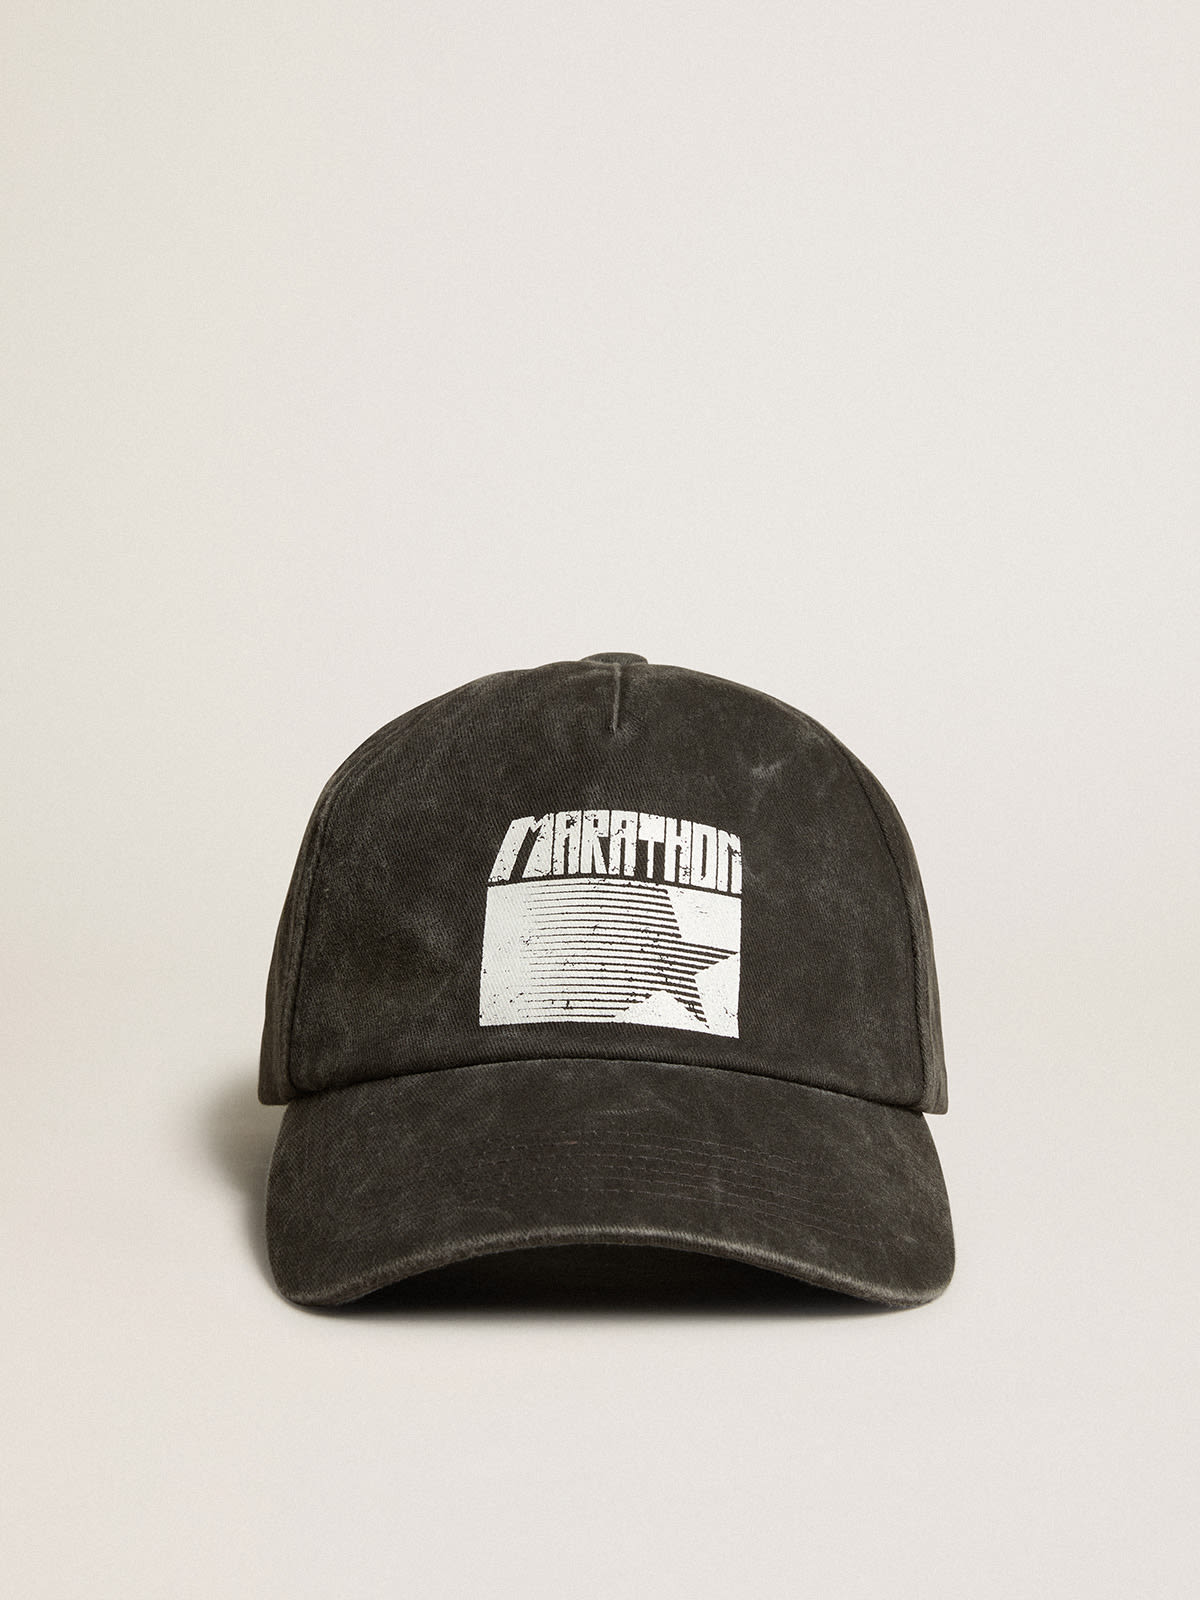 Golden Goose - Anthracite gray cap with Marathon logo on the front in 